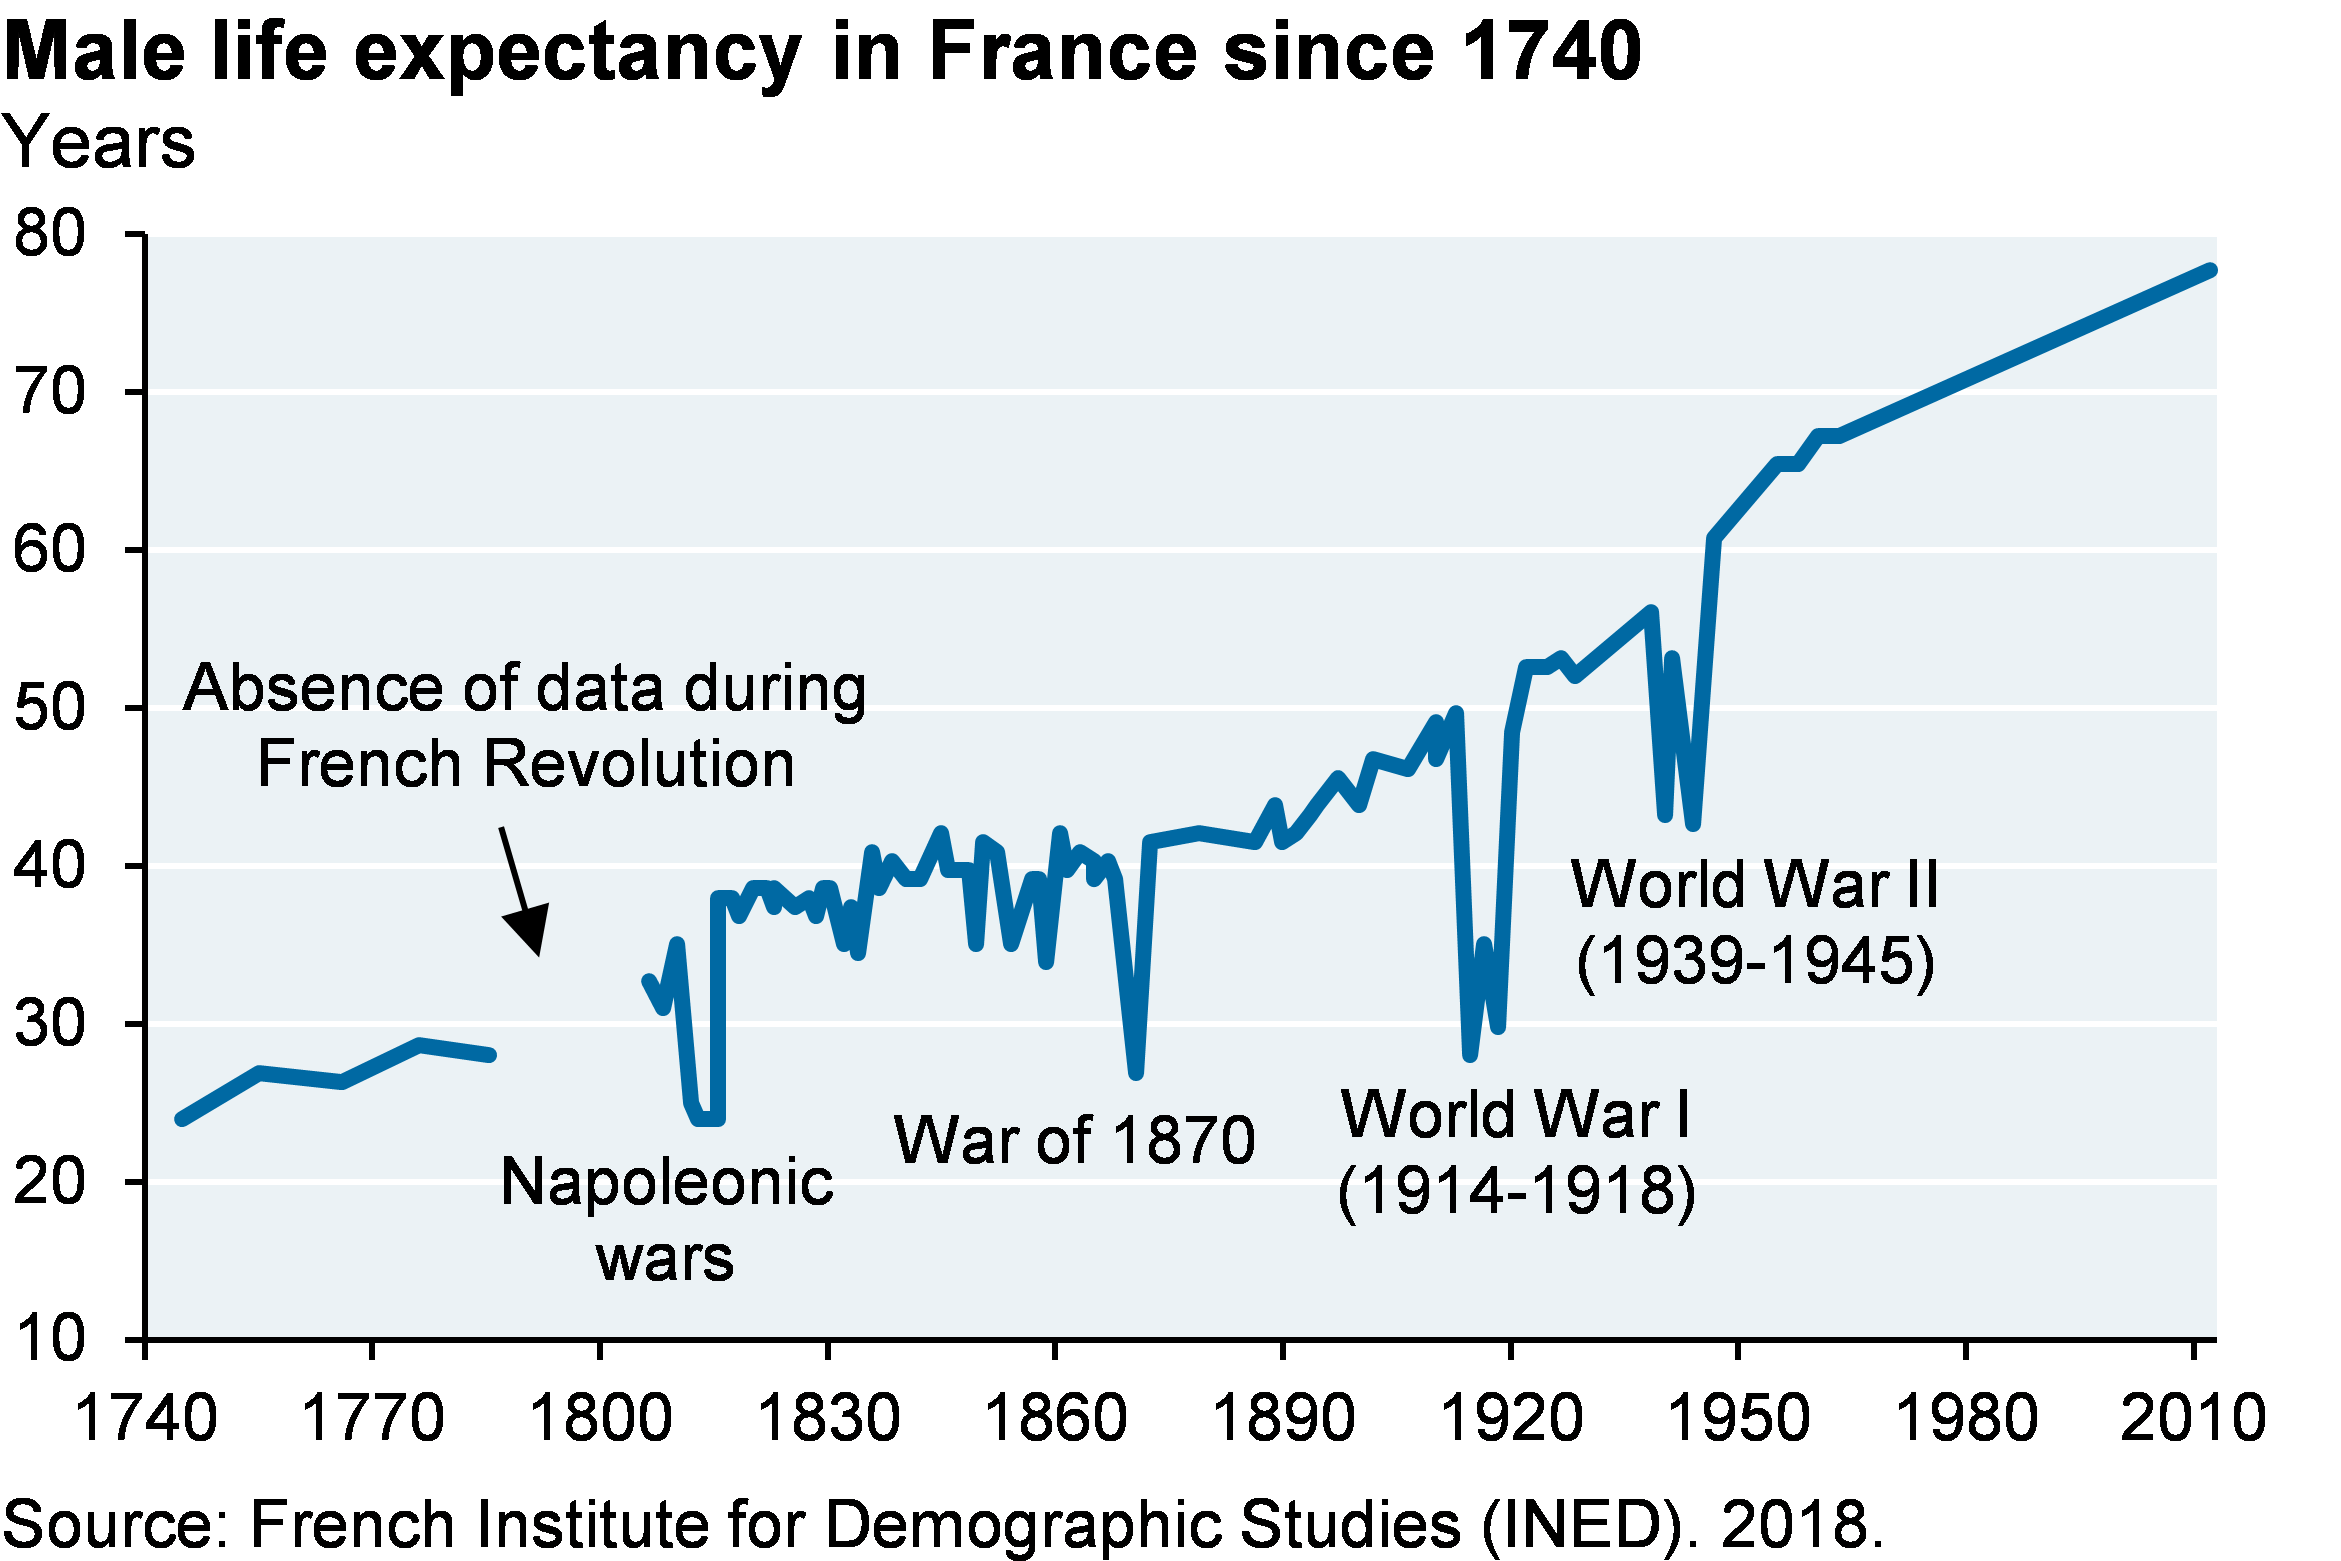 Line chart showing male life expectancy in France since 1740. The chart shows that life expectancy steadily rose from 1800 to around 1940, with a few sharp drops caused by the Napoleonic wars, War of 1870, WWI and WWII. However, after 1940 life expectancy began to rise more rapidly, largely due to mass production of antibiotics. 